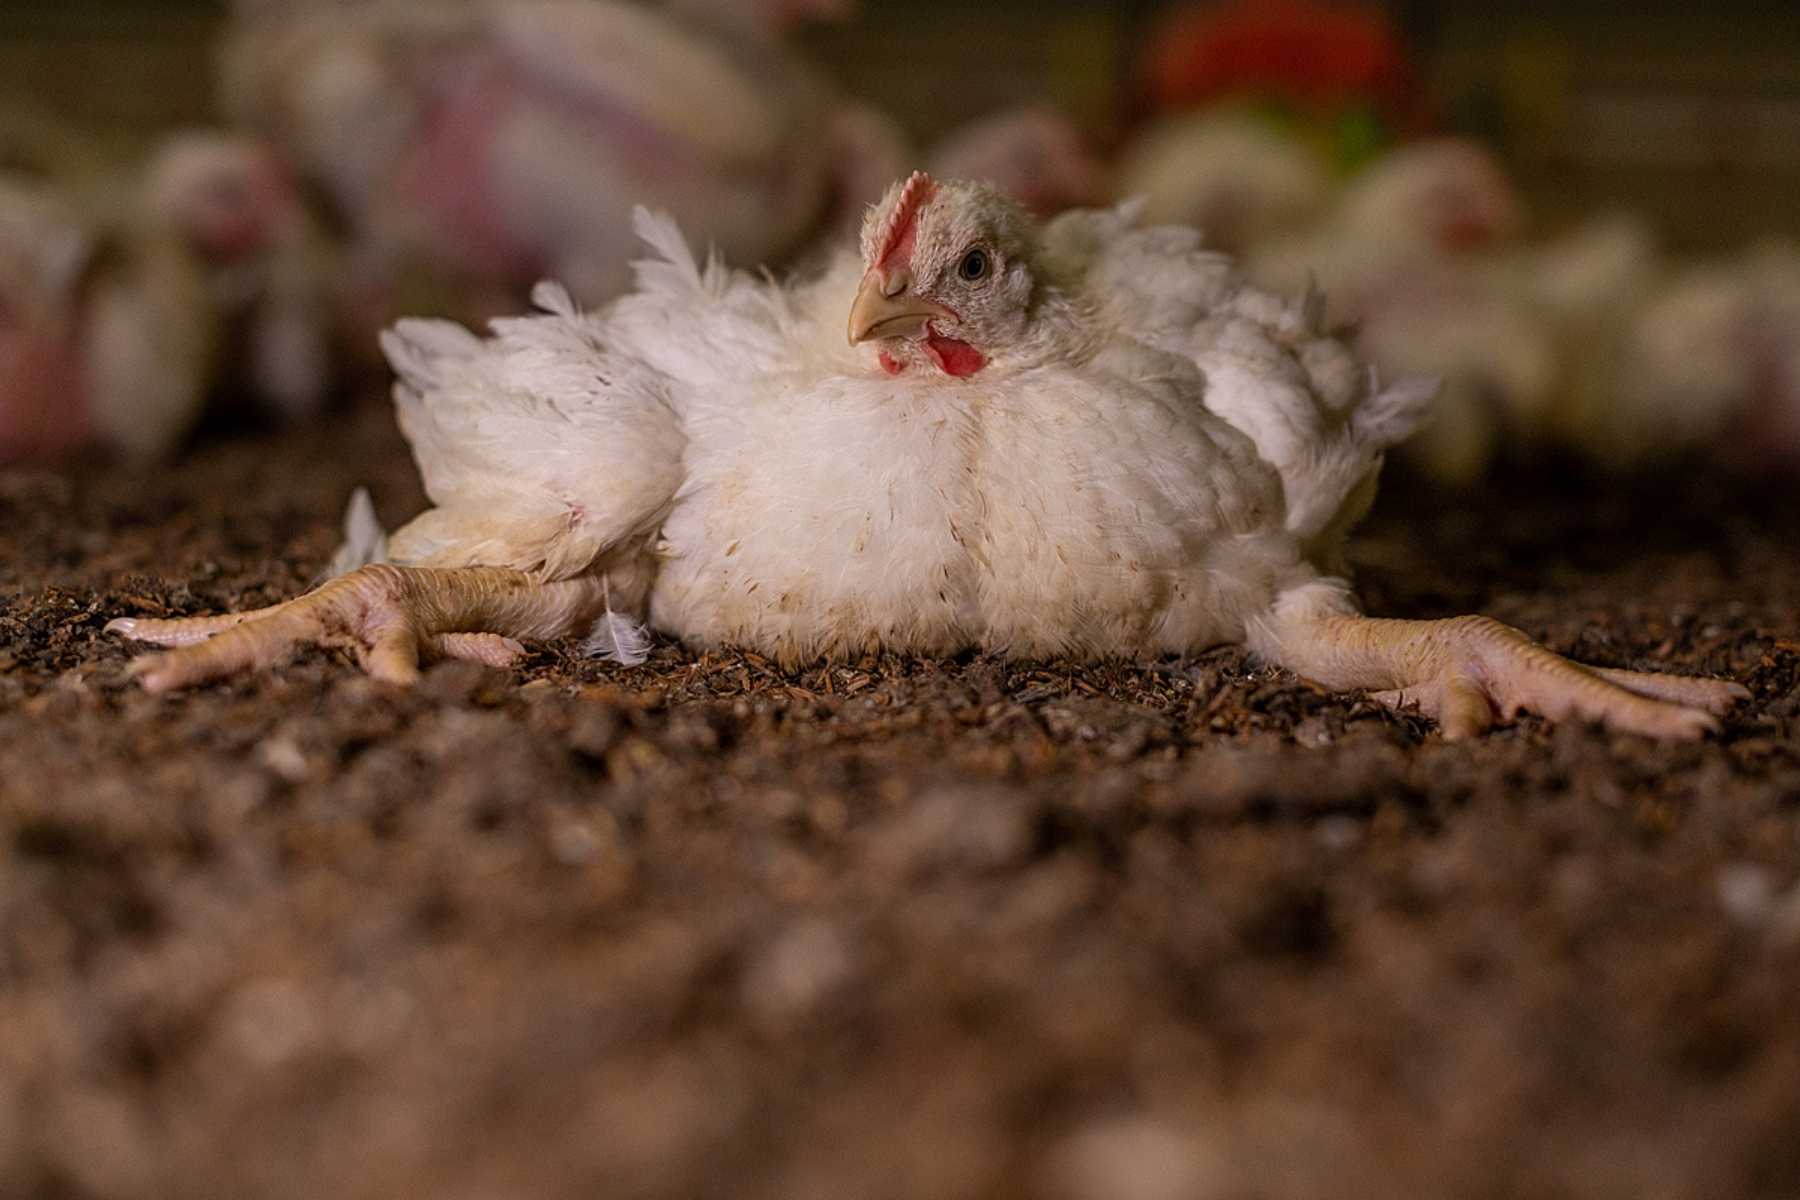 A chicken unable to stand inside a broiler chicken farm.